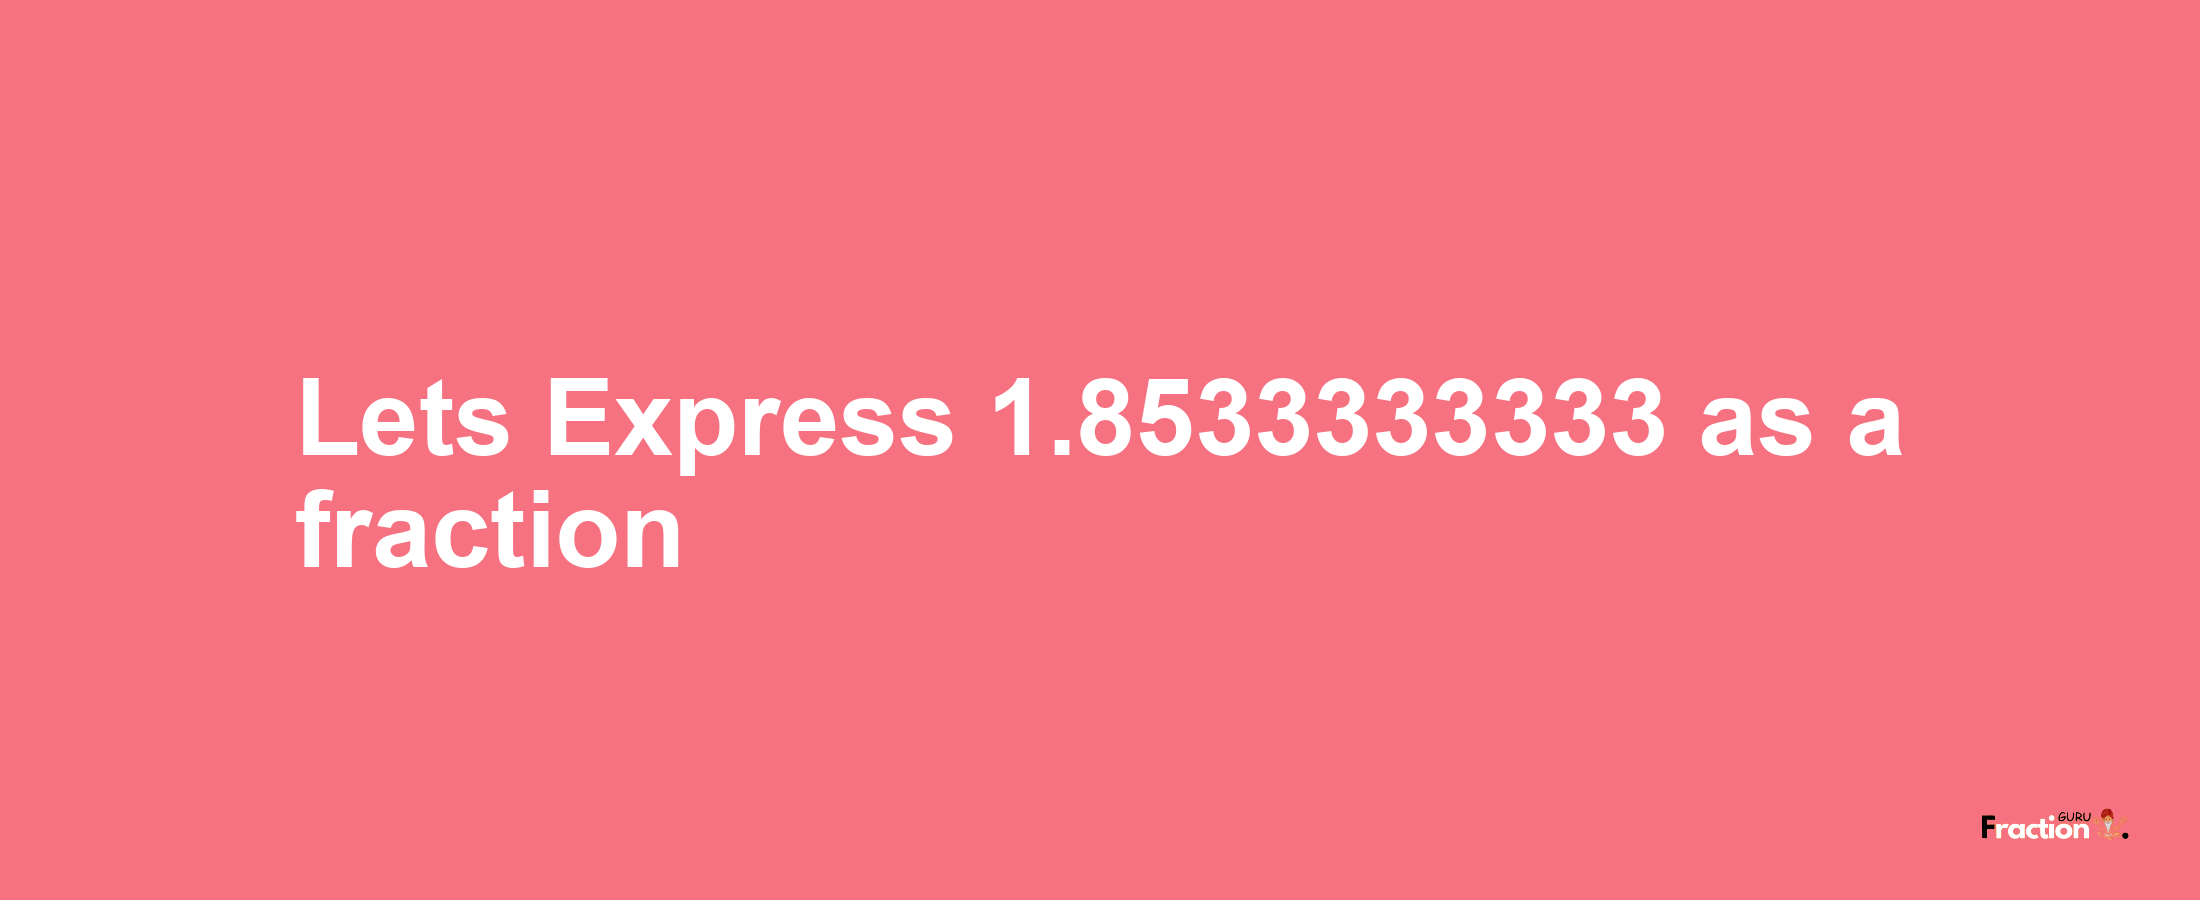 Lets Express 1.8533333333 as afraction